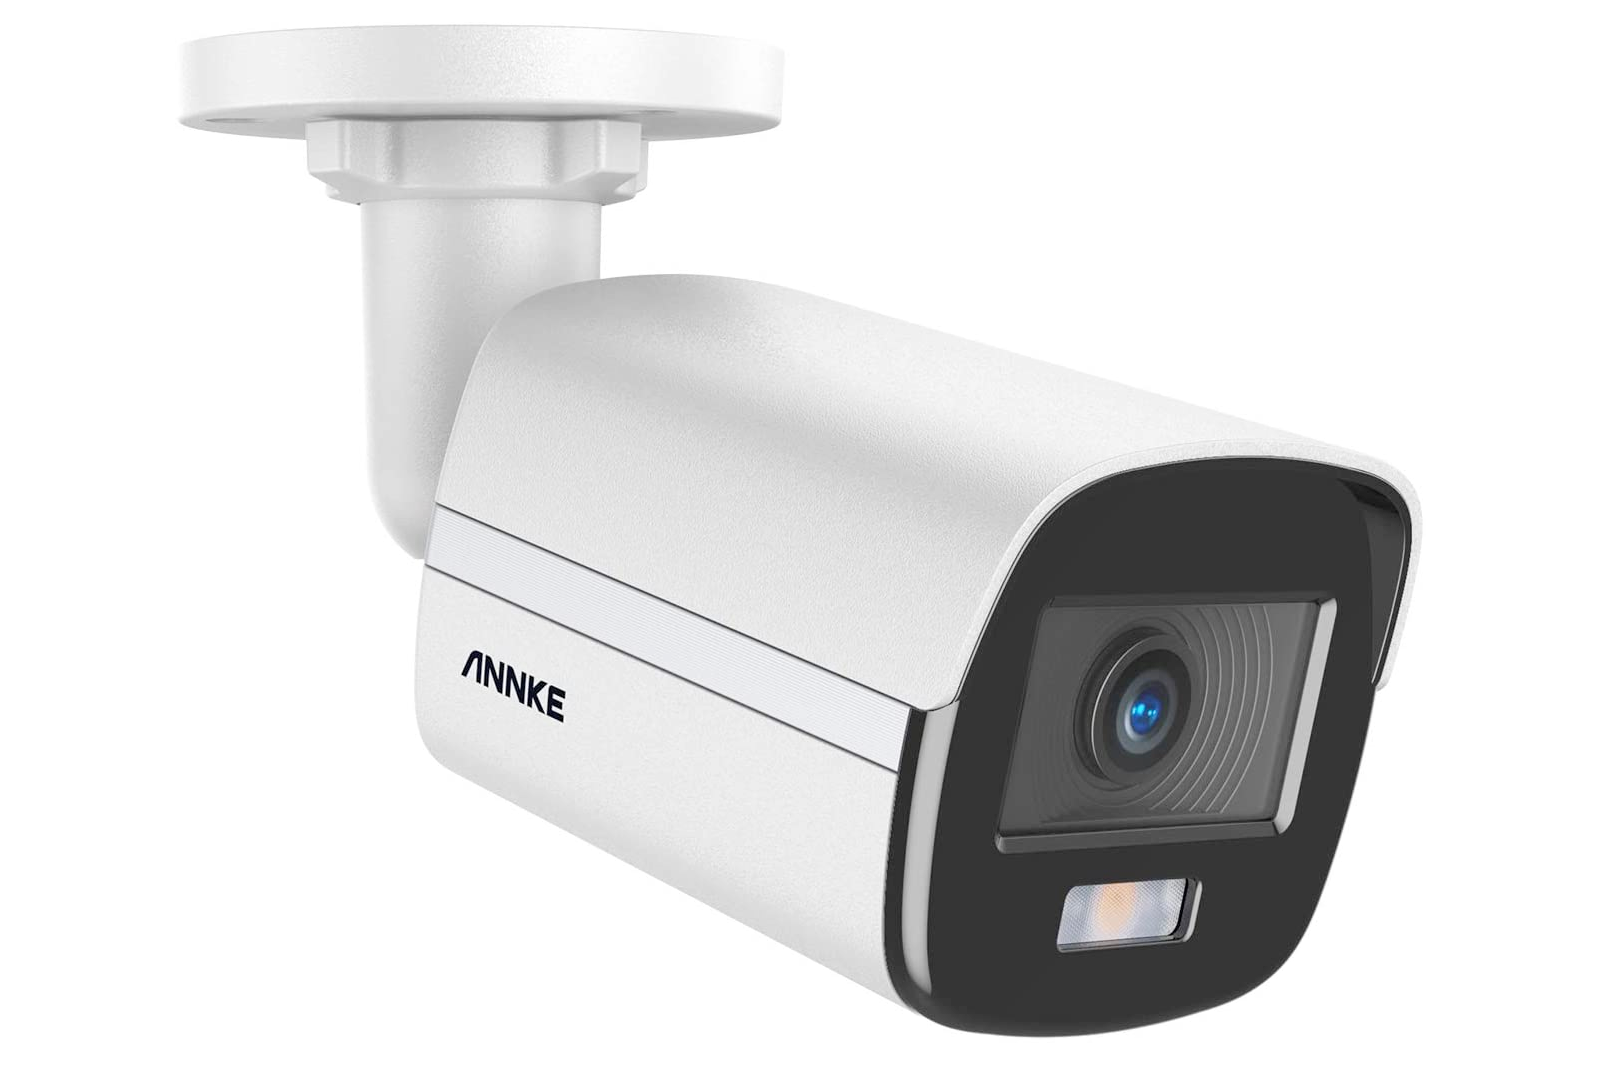 Annke home security deals for Prime Day photo 16